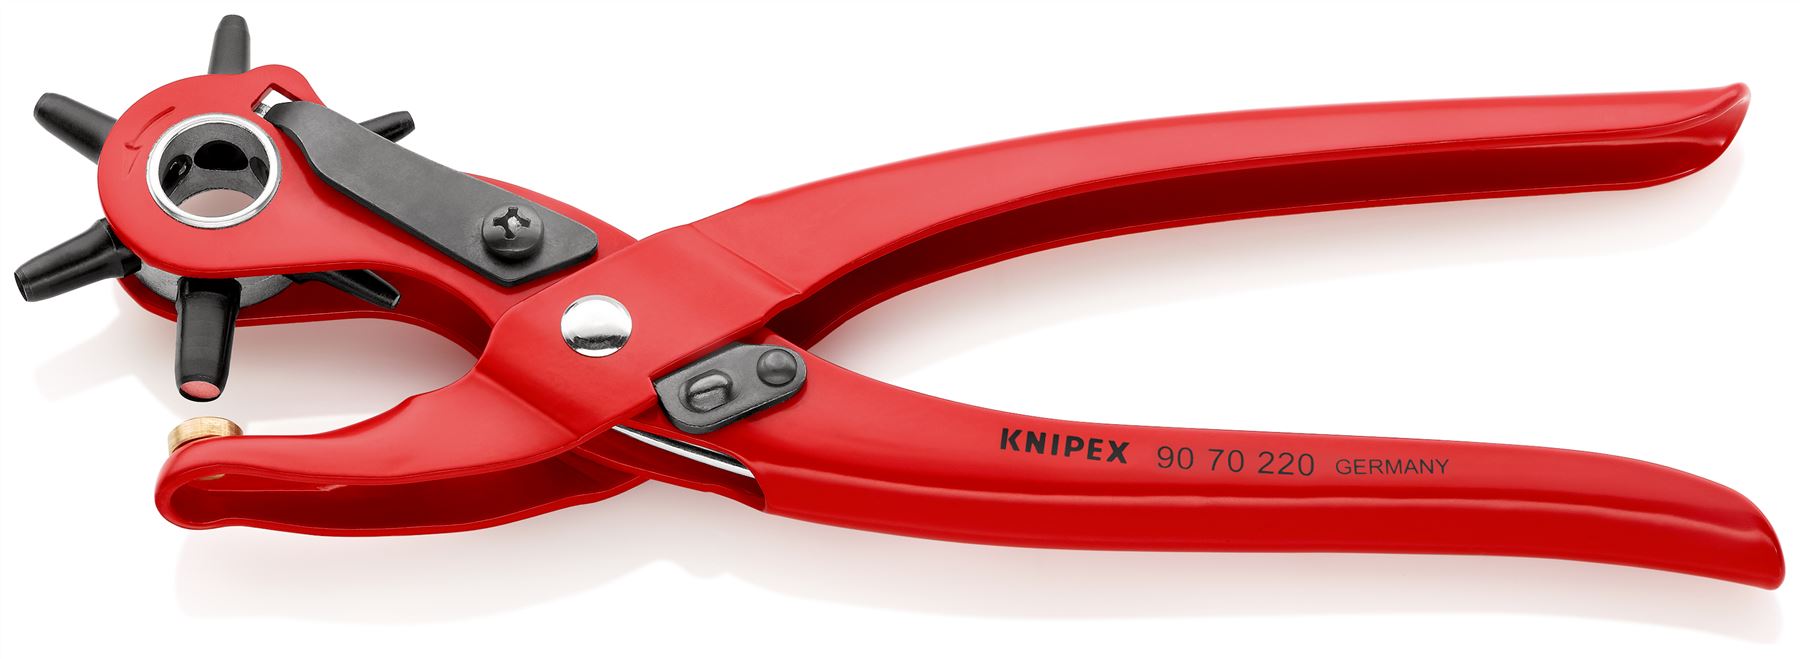 KNIPEX Revolving Punch Pliers 2-5mm Capacity 220mm for Fabrics Leather Paper Soft Plastic 90 70 220